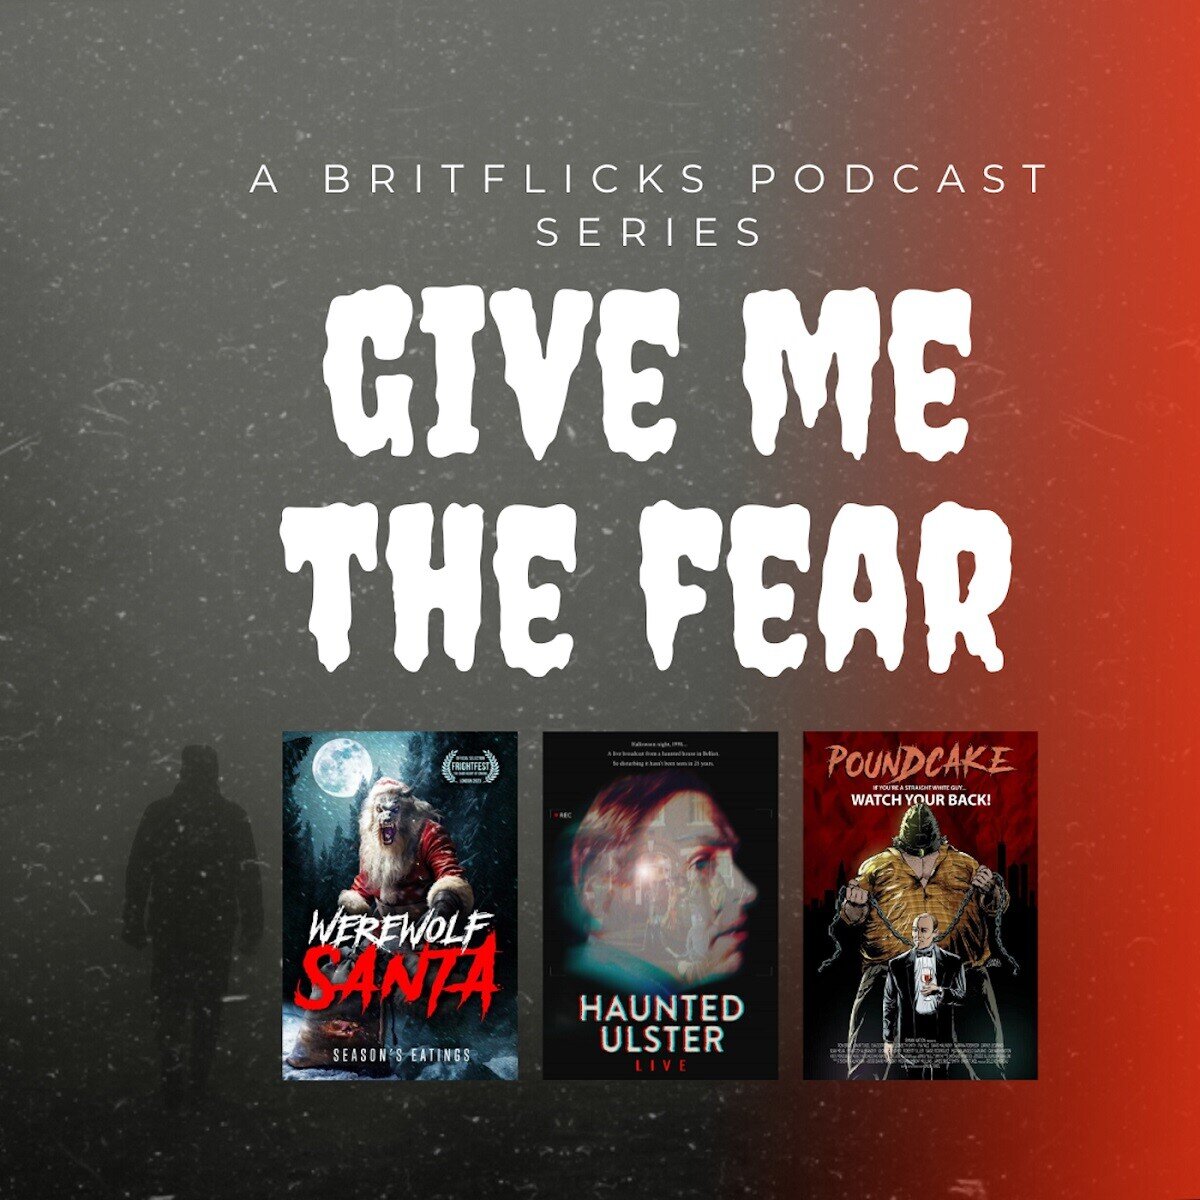 GIVE ME THE FEAR, Part 6 Frightfest 2023 Preview Podcast Featuring WEREWOLF SANTA, HAUNTED ULSTER LIVE and POUNDCAKE